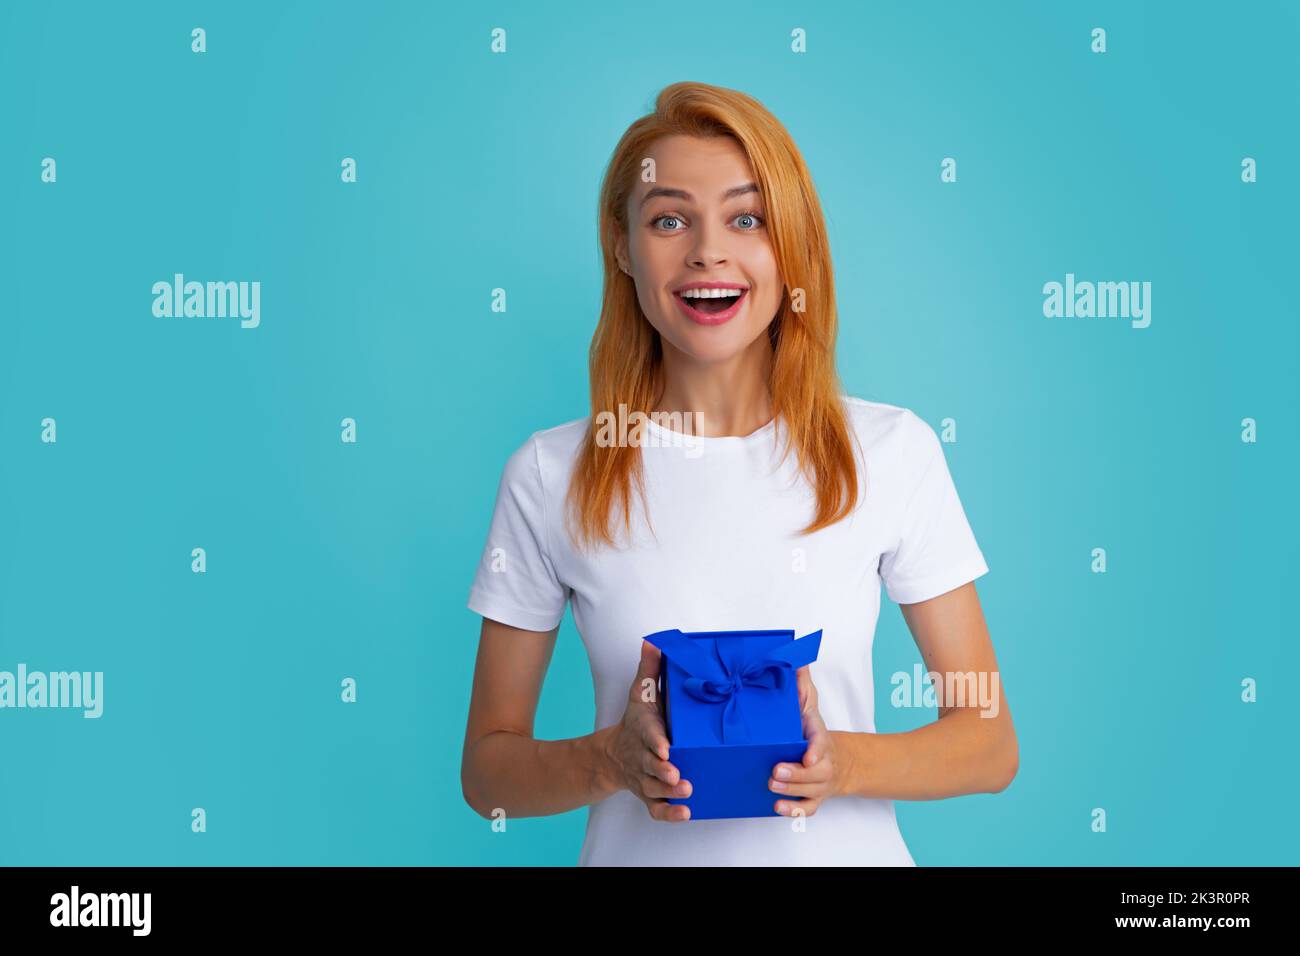 Surprised woman holding gift. Smiling beautiful young redhead woman in shirt hold present box with gift ribbon bow isolated on bright blue background Stock Photo